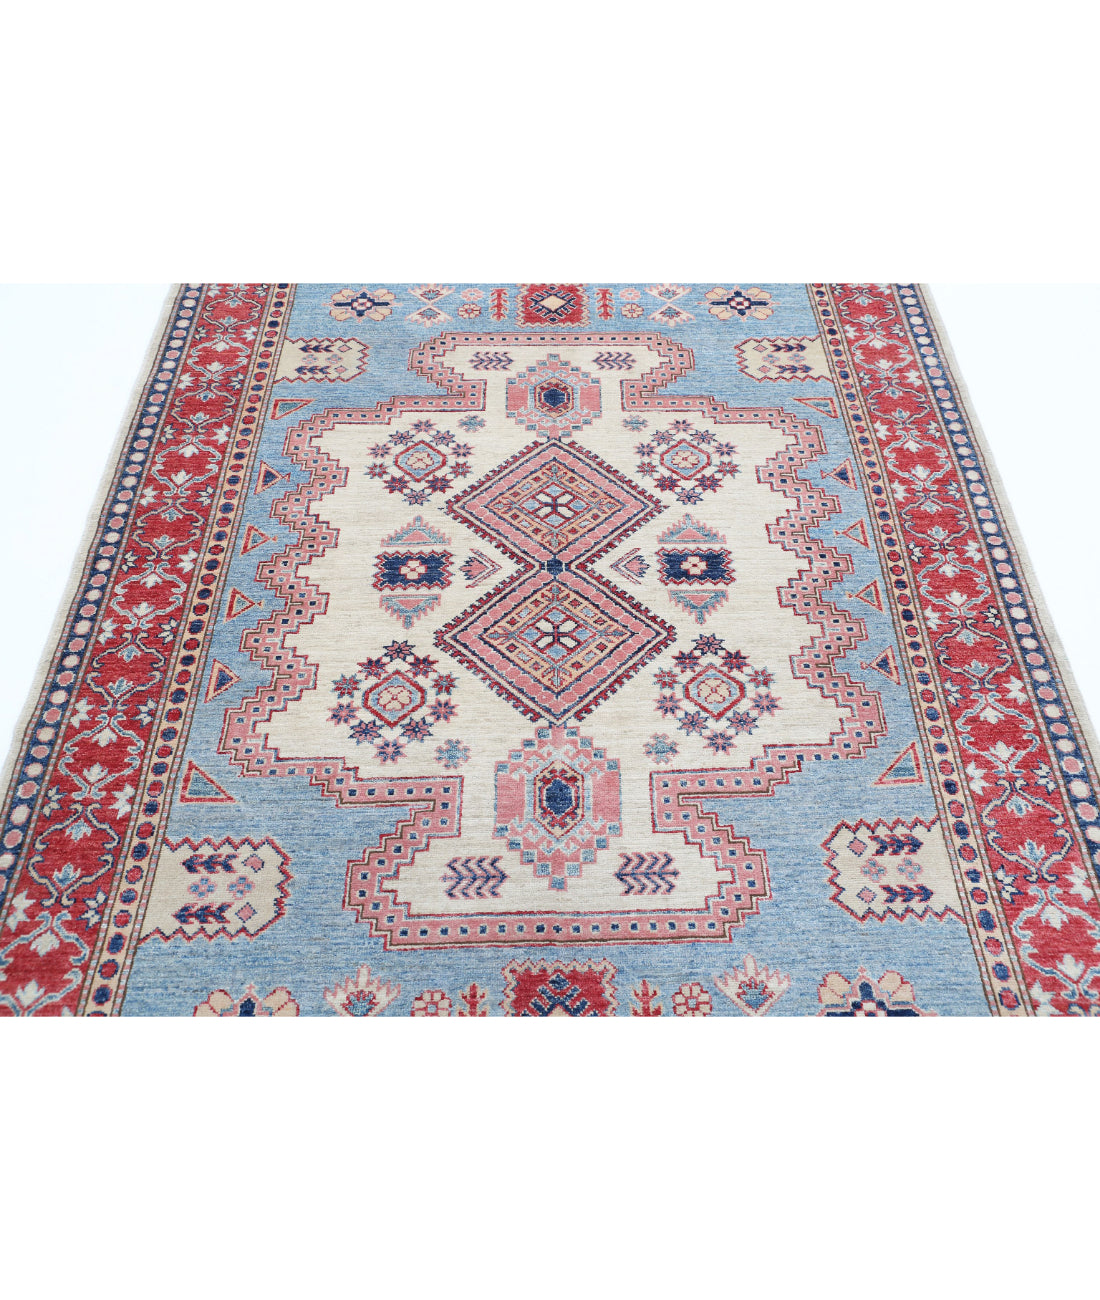 Kazak 5'1'' X 6'9'' Hand-Knotted Wool Rug 5'1'' x 6'9'' (153 X 203) / Teal / Red